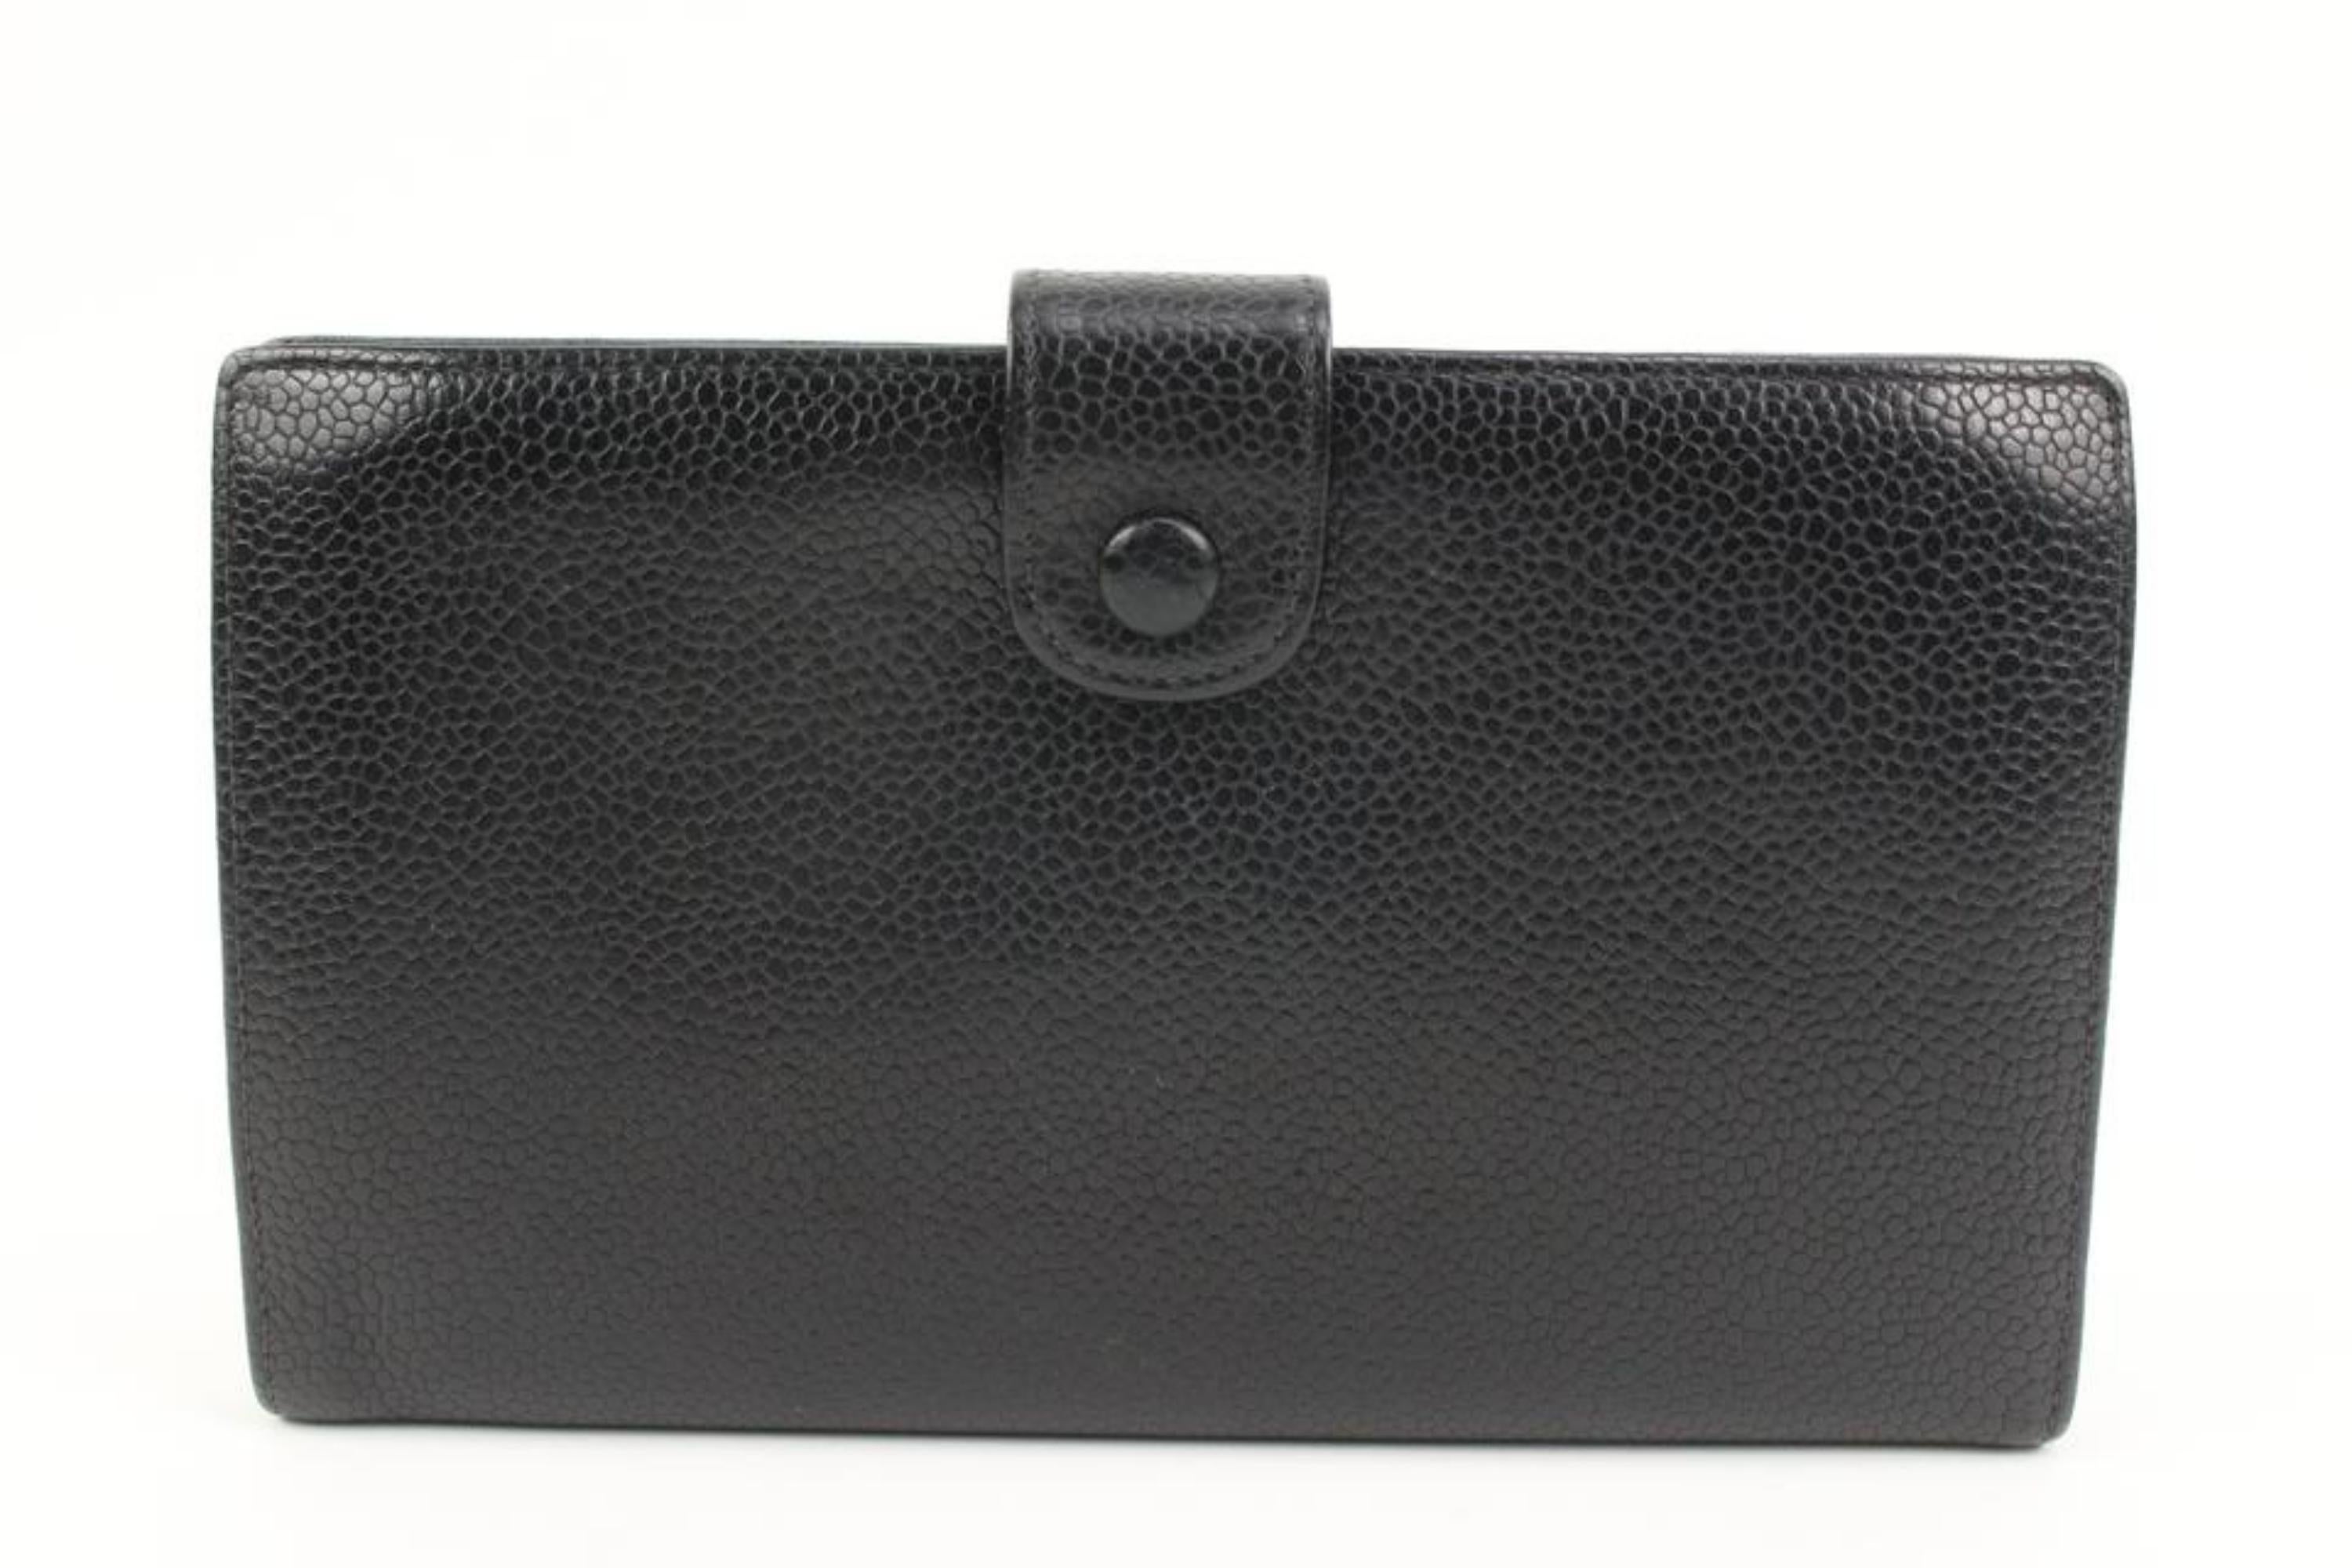 Chanel Black Caviar Leather CC Logo Long Snap Bifold Wallet 53ck32s In Good Condition For Sale In Dix hills, NY